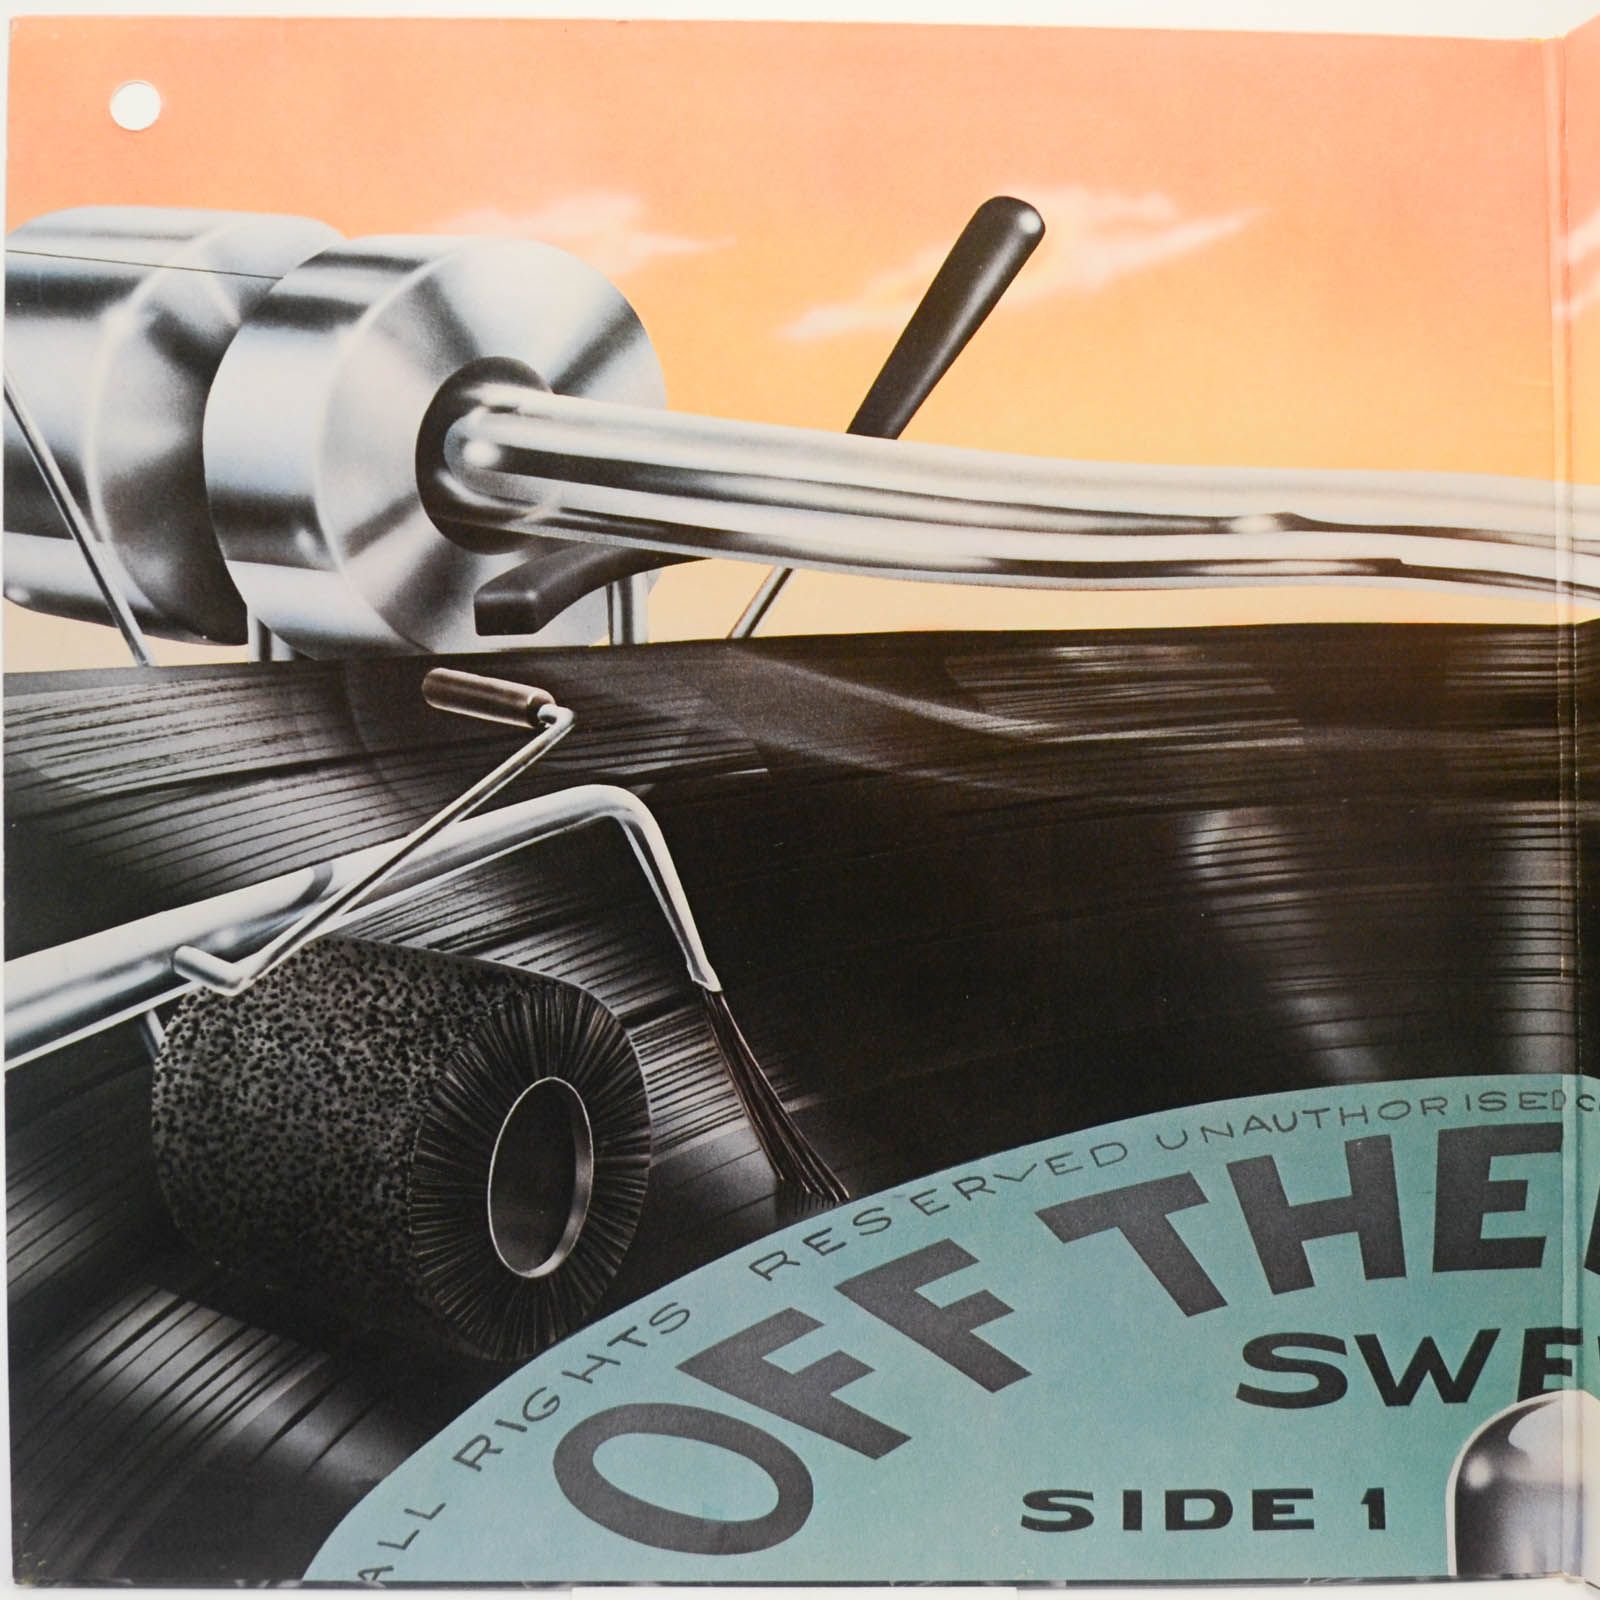 Sweet — Off The Record (USA), 1977